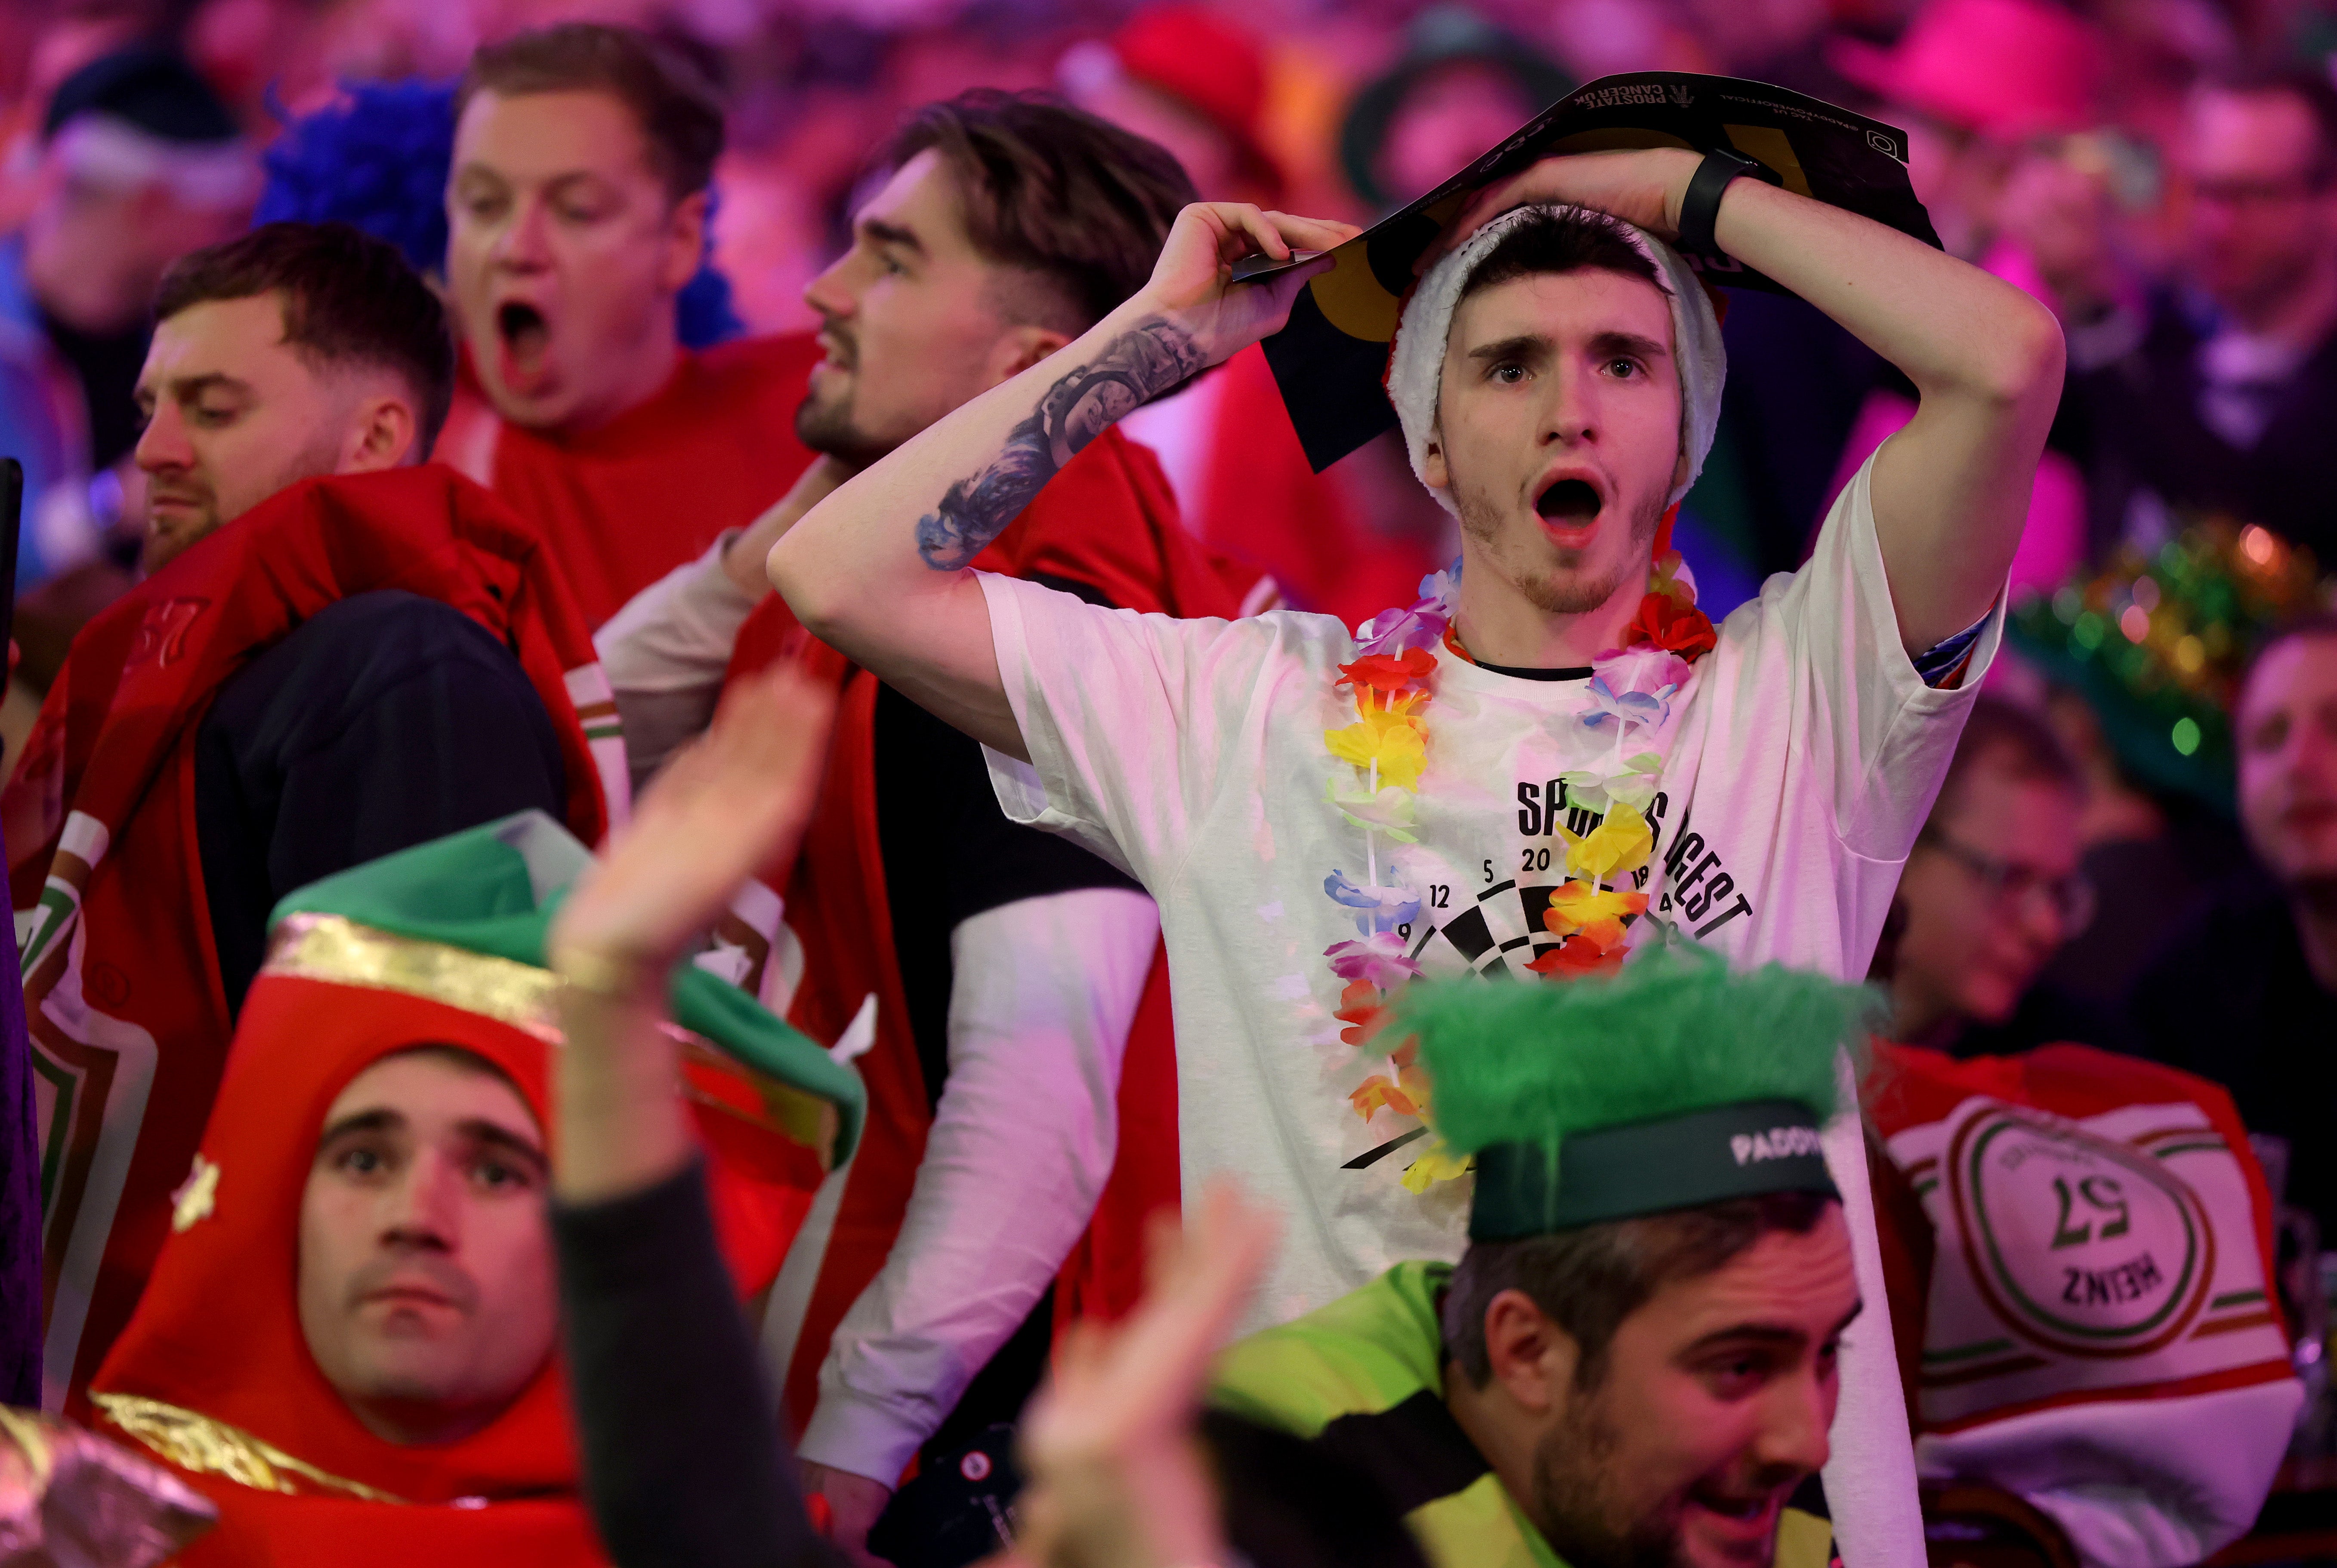 Fans at the opening night of the World Darts Championship